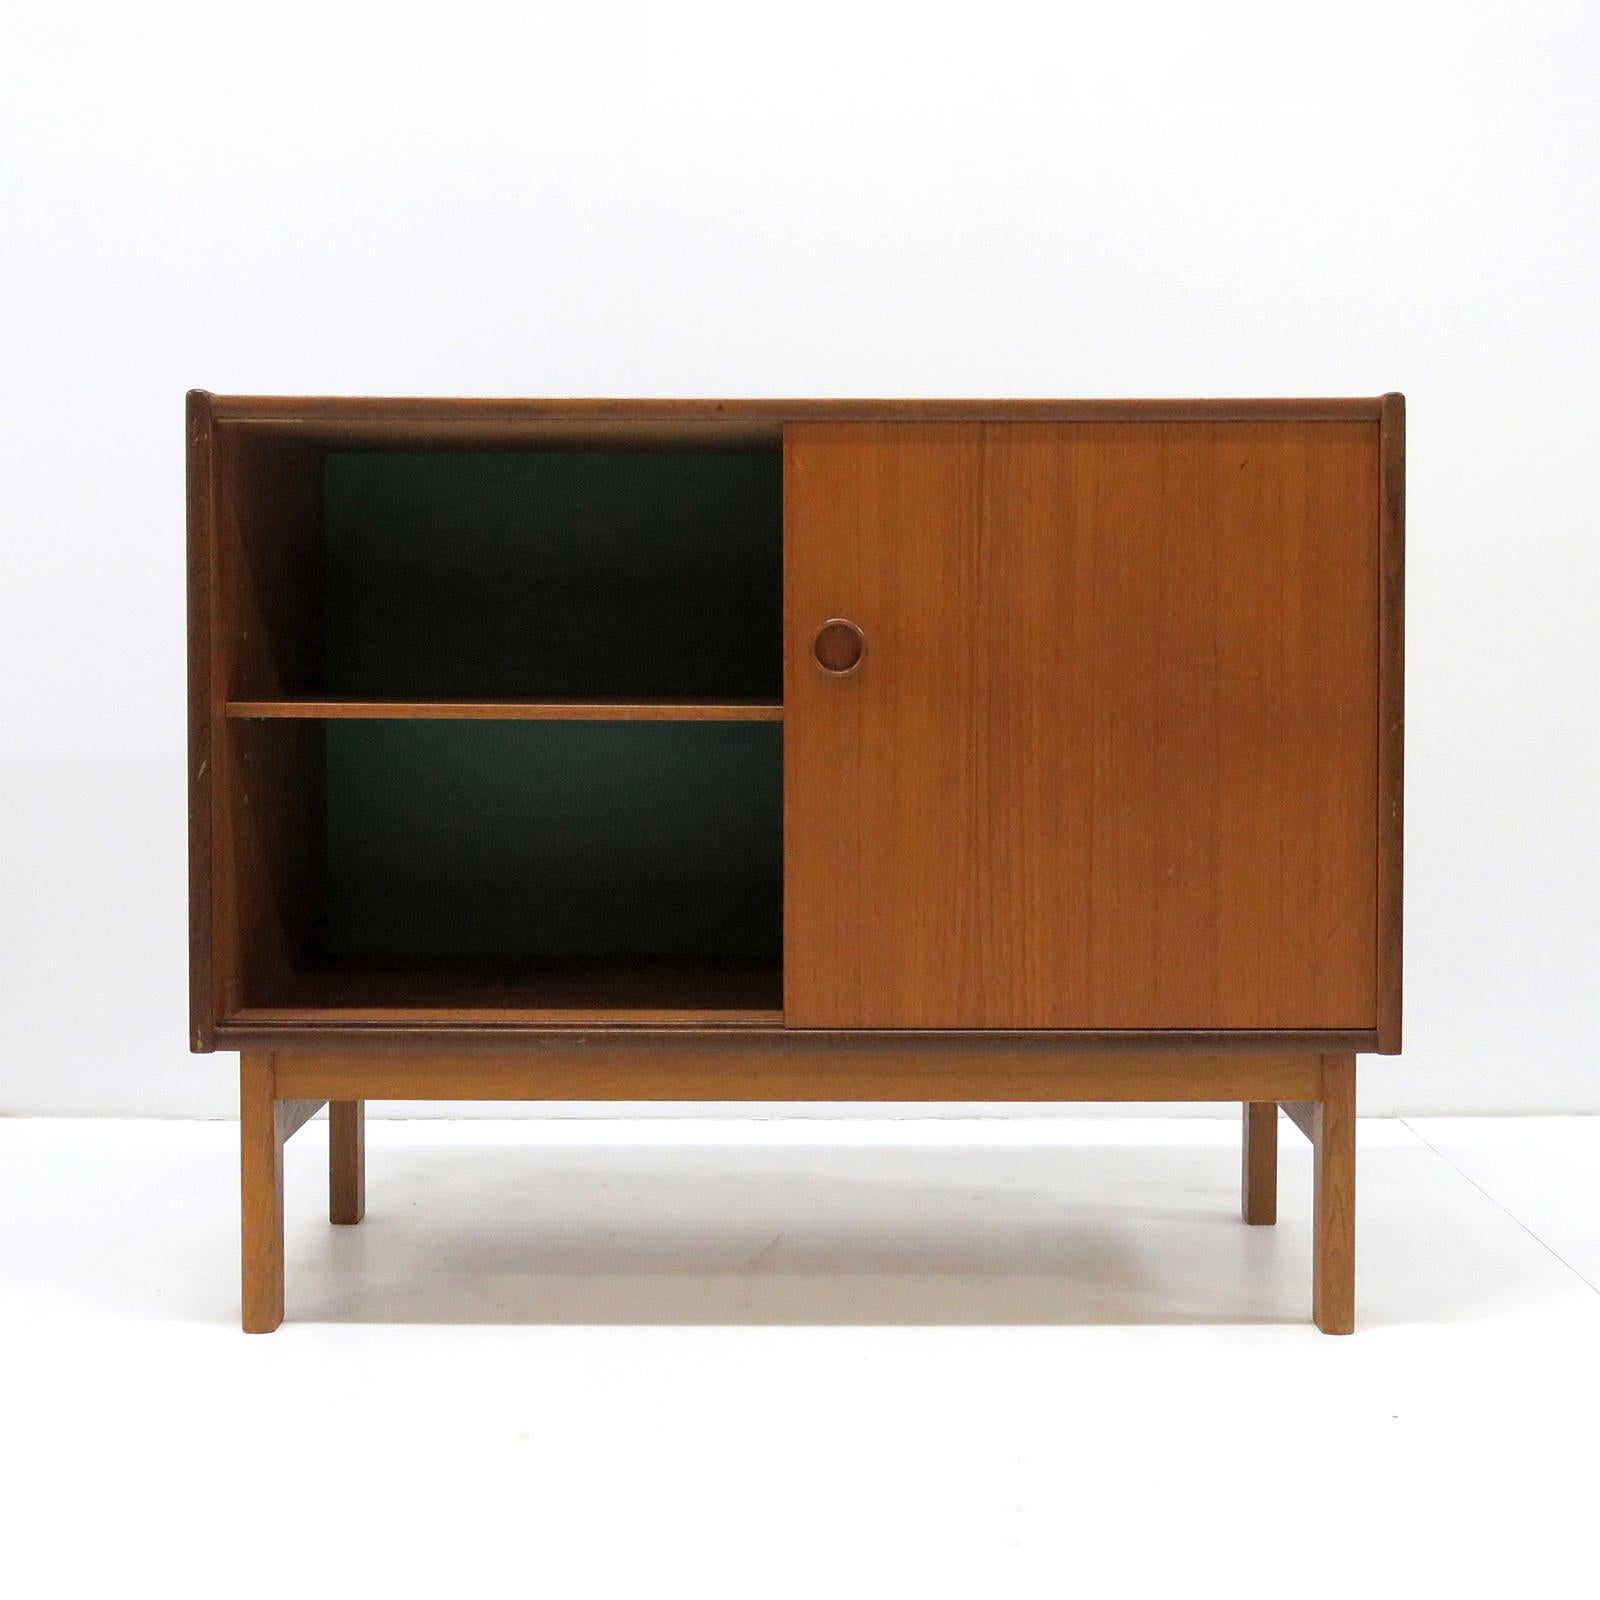 wonderful small-scale 1960s Danish sideboards/dressers in teak on an oak frame, with one adjustable shelf behind two sliding doors, the inside of the back wall is teal colored. Priced individually.